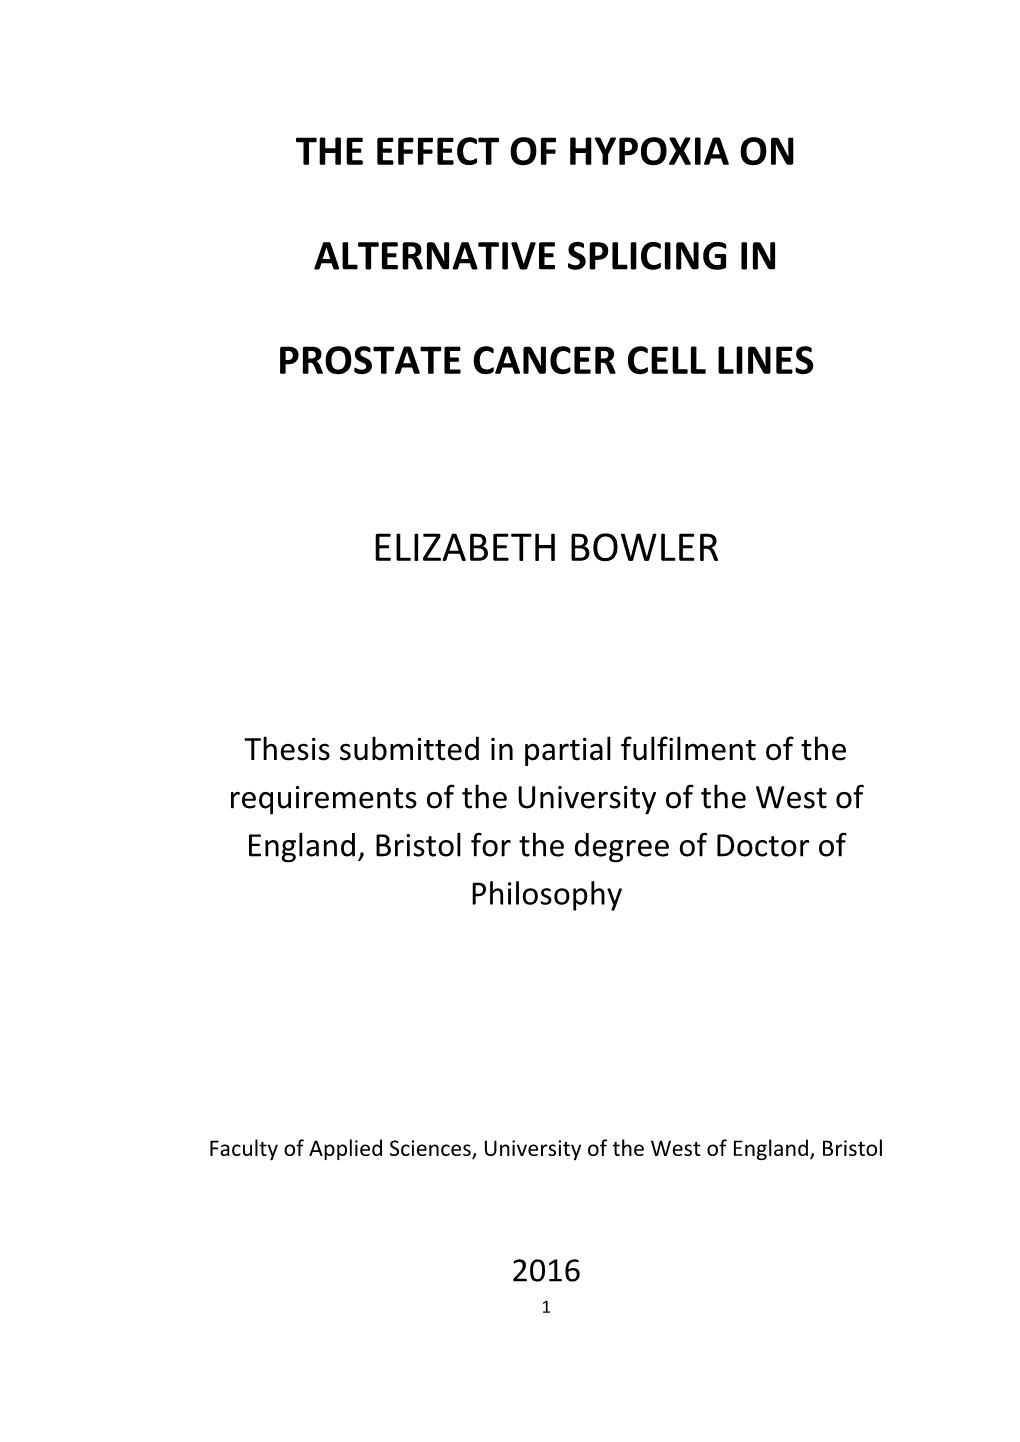 The Effect of Hypoxia on Alternative Splicing in Prostate Cancer Cell Lines Elizabeth Bowler